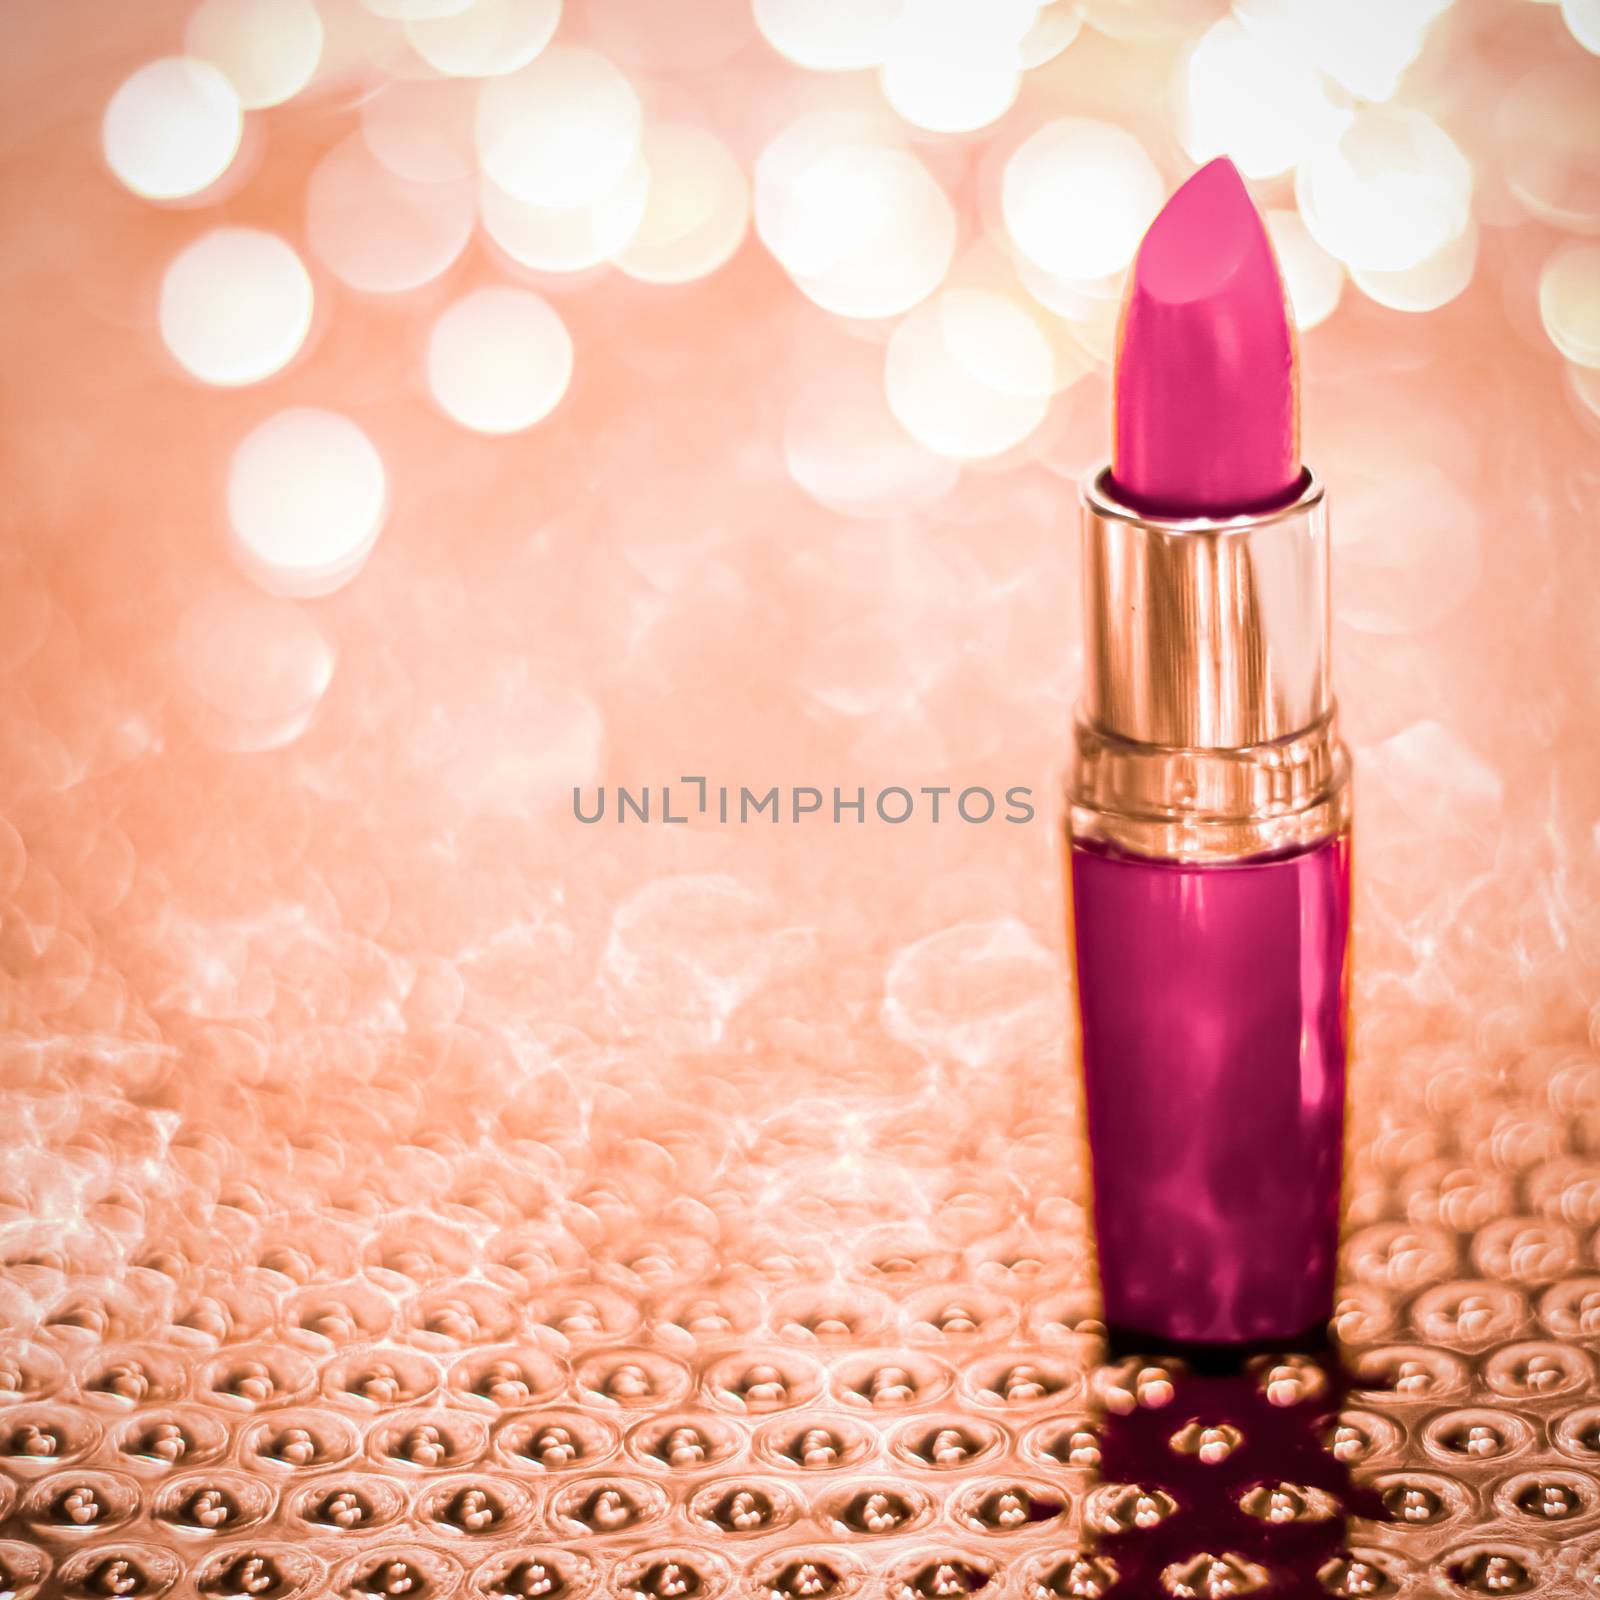 Cosmetic branding, sale and glamour concept - Pink lipstick on rose gold Christmas, New Years and Valentines Day holiday glitter background, make-up and cosmetics product for luxury beauty brand